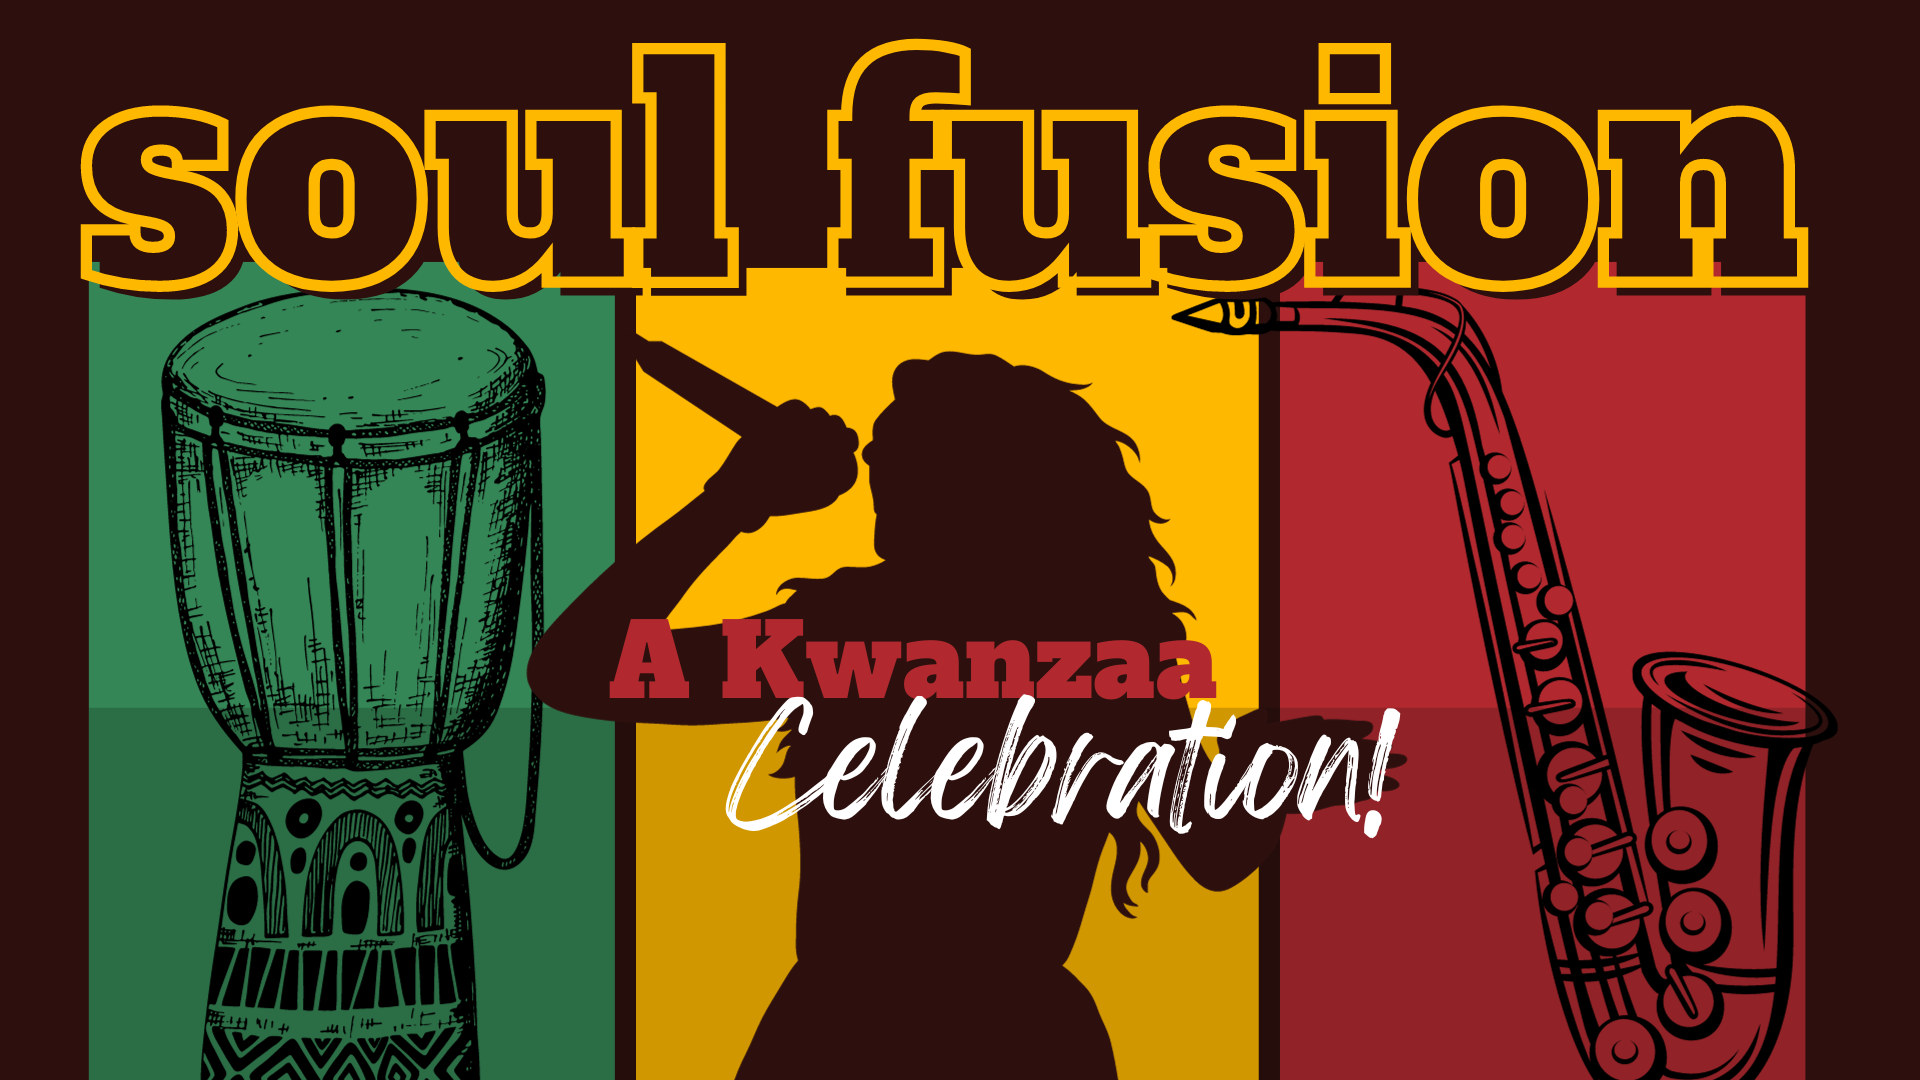 Soul Fusion: A Kwanzaa Celebration! - San Miguel Live! Events in